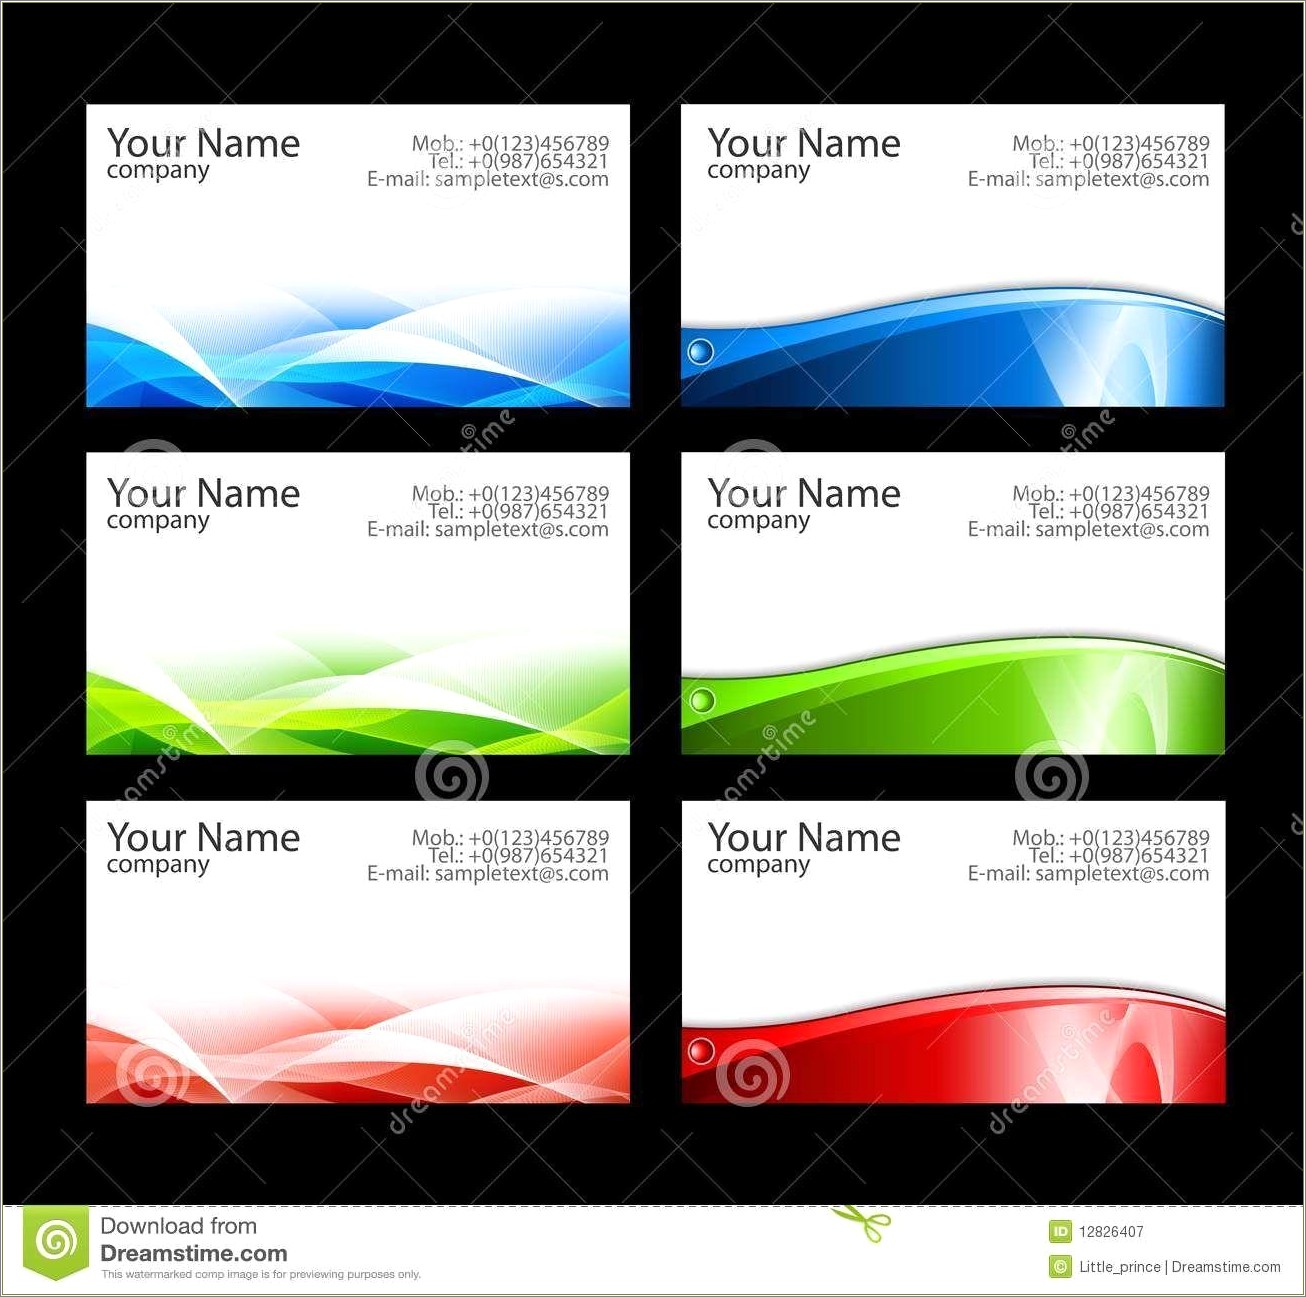 Free Online Blank Business Card Templates Printable